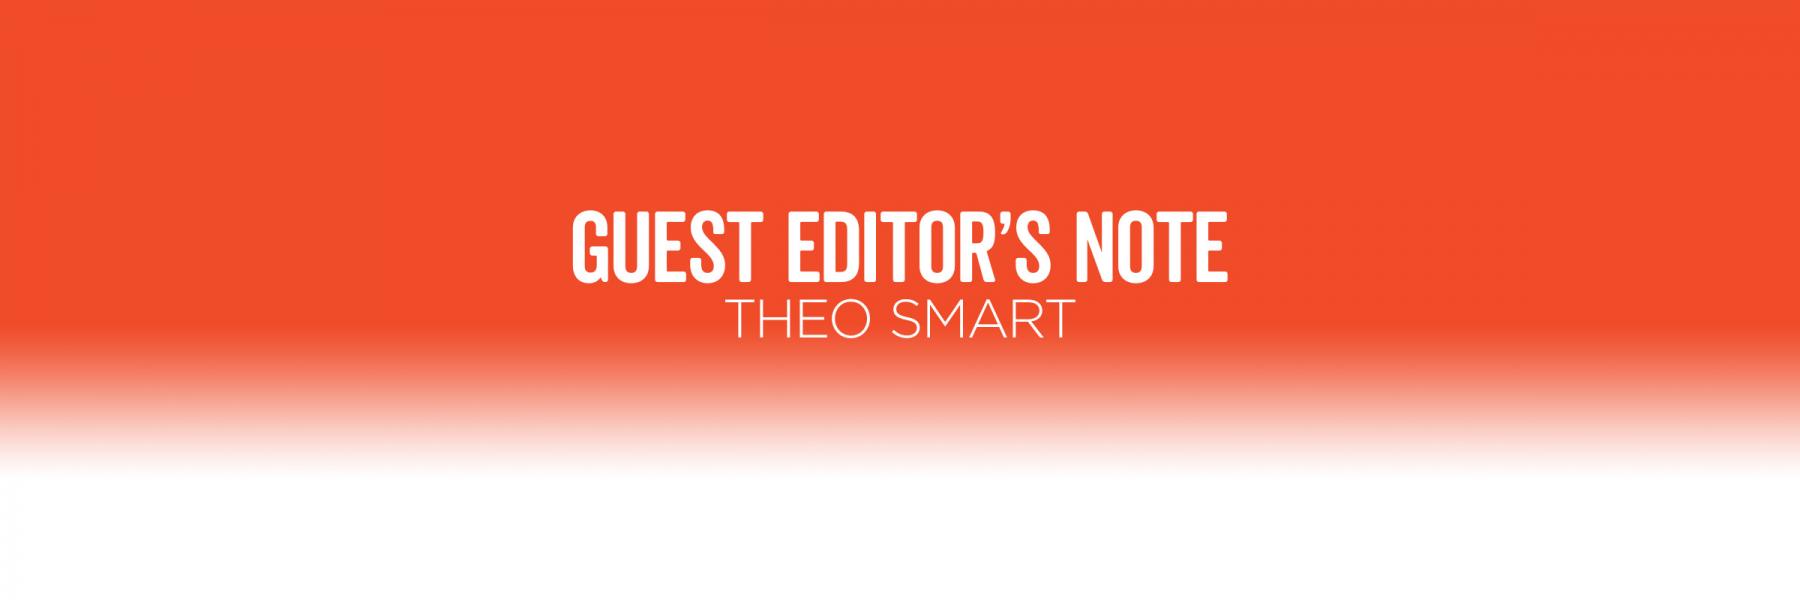 Positively Aware Guest Editor Theo Smart